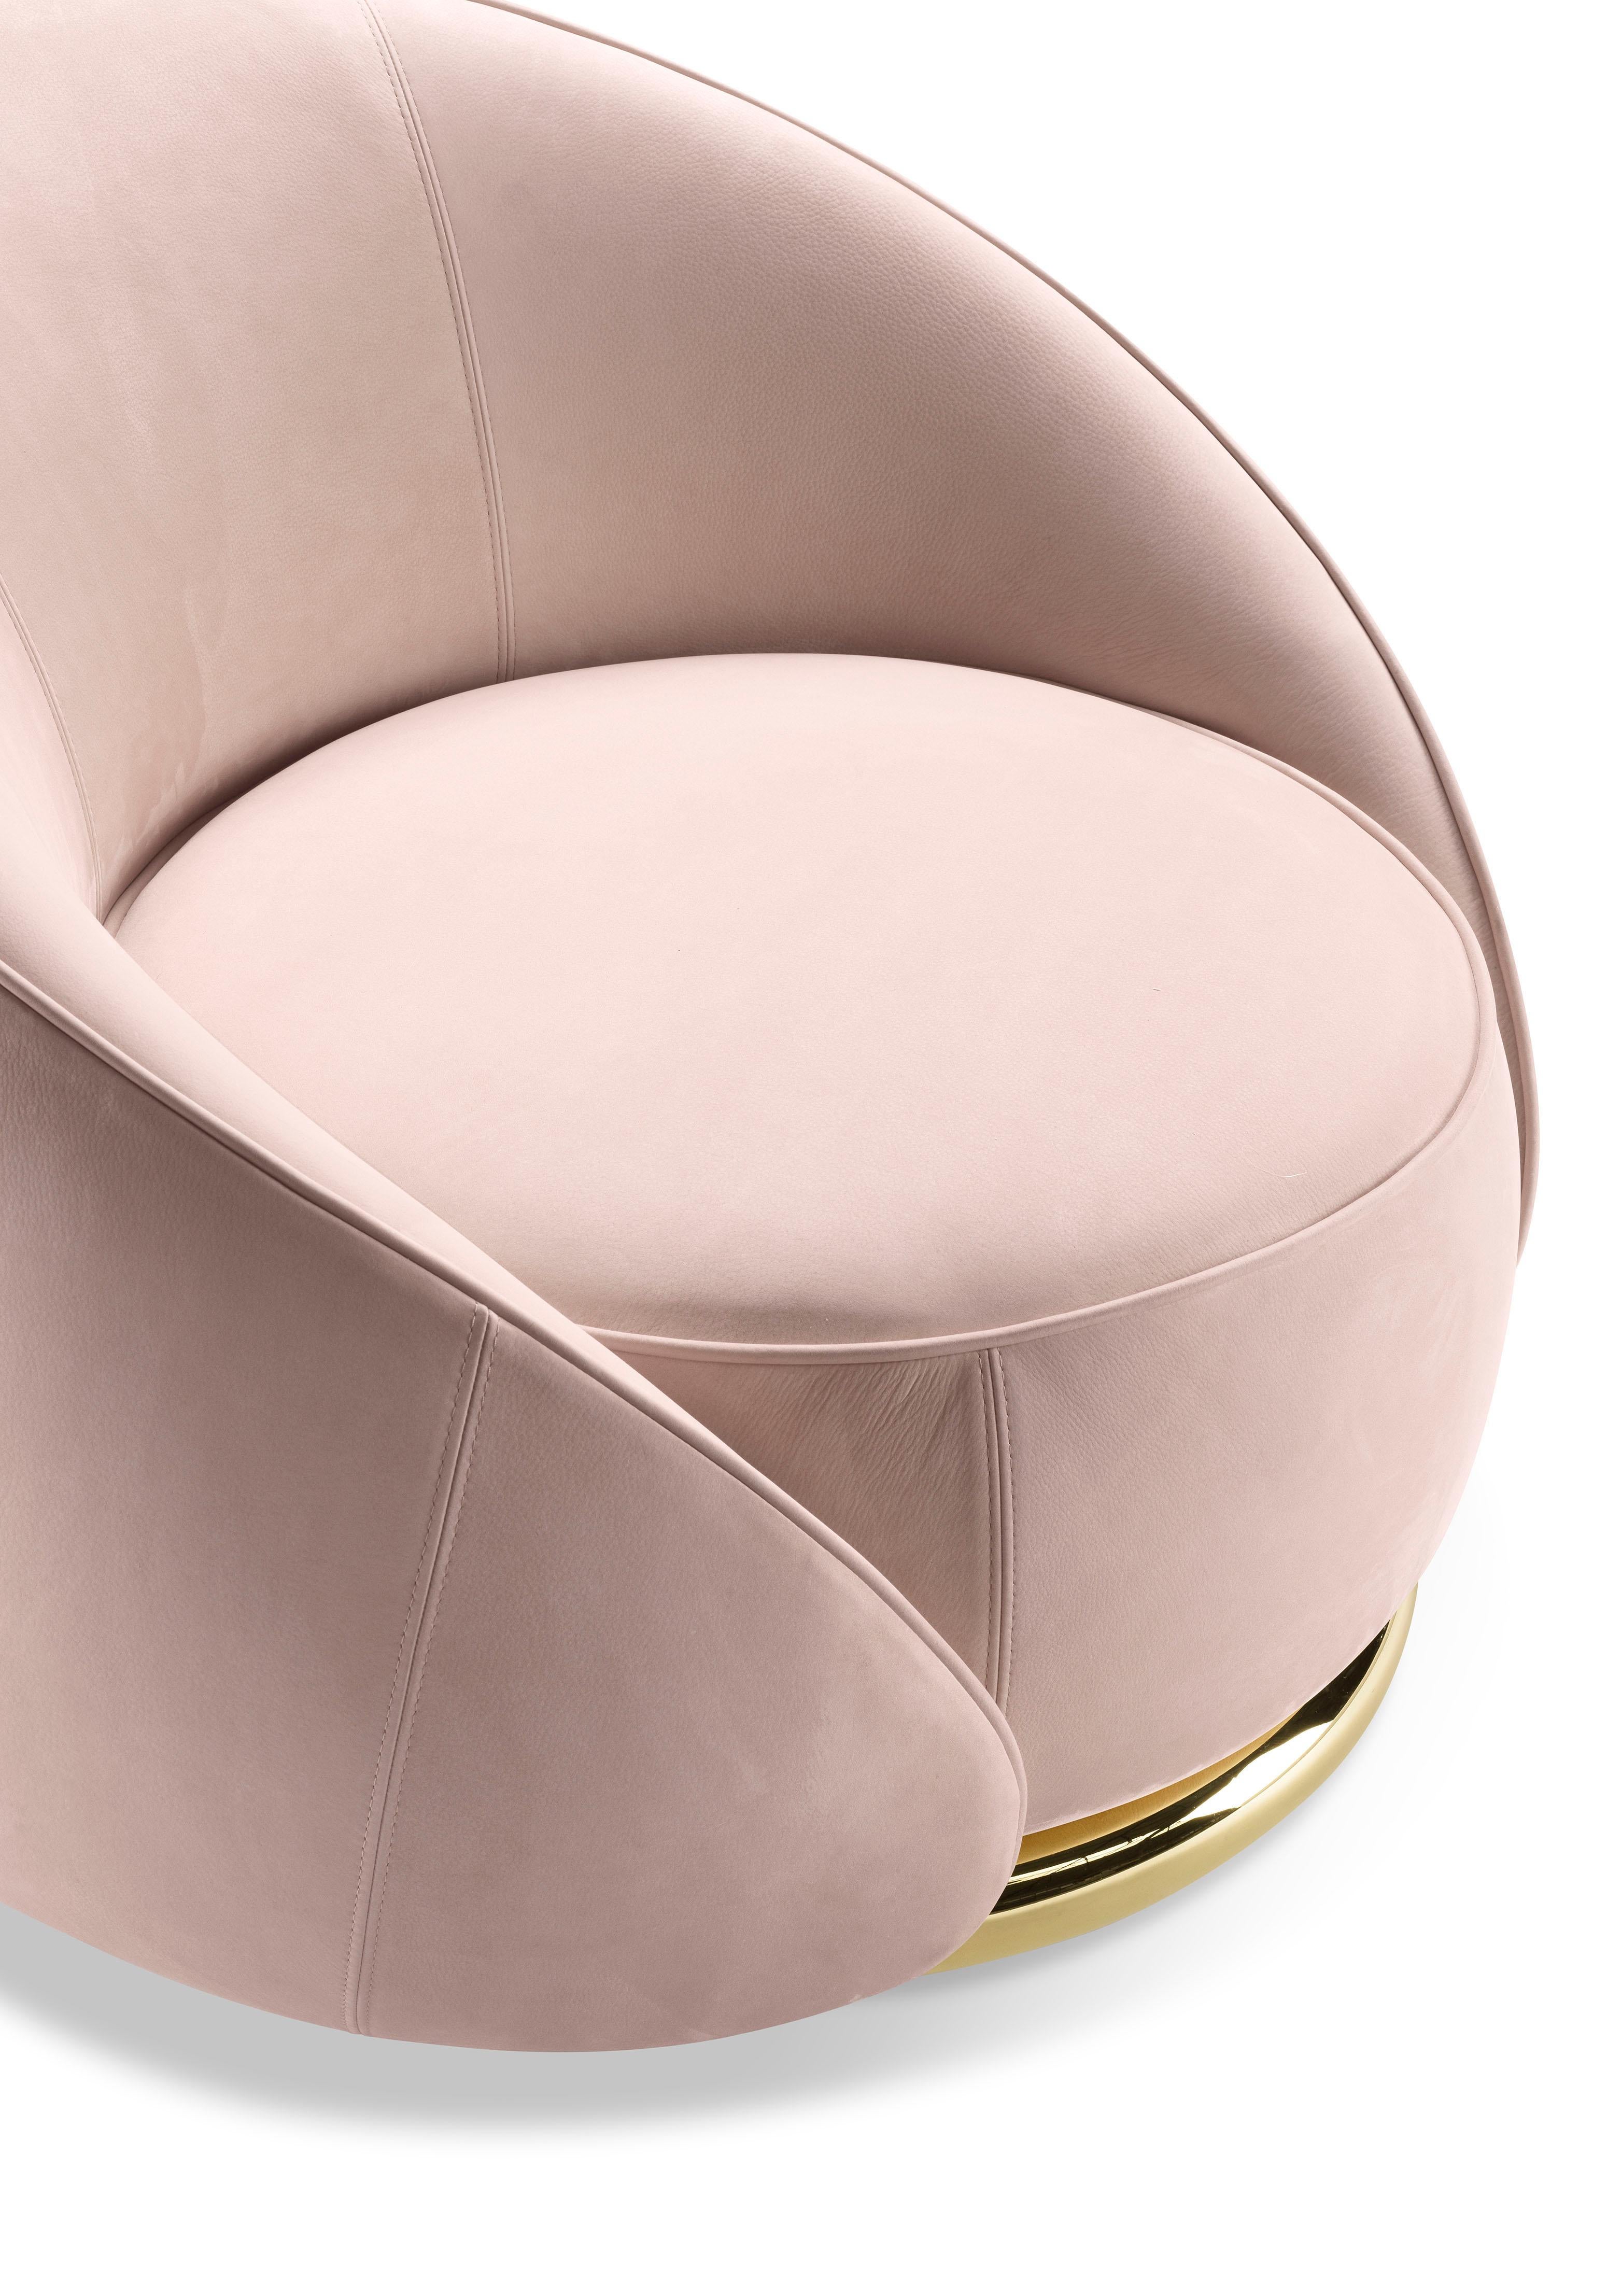 Italian Ghidini 1961 Abbracci Armchair in Pink Leather with Brass Base by L. Bozzoli For Sale